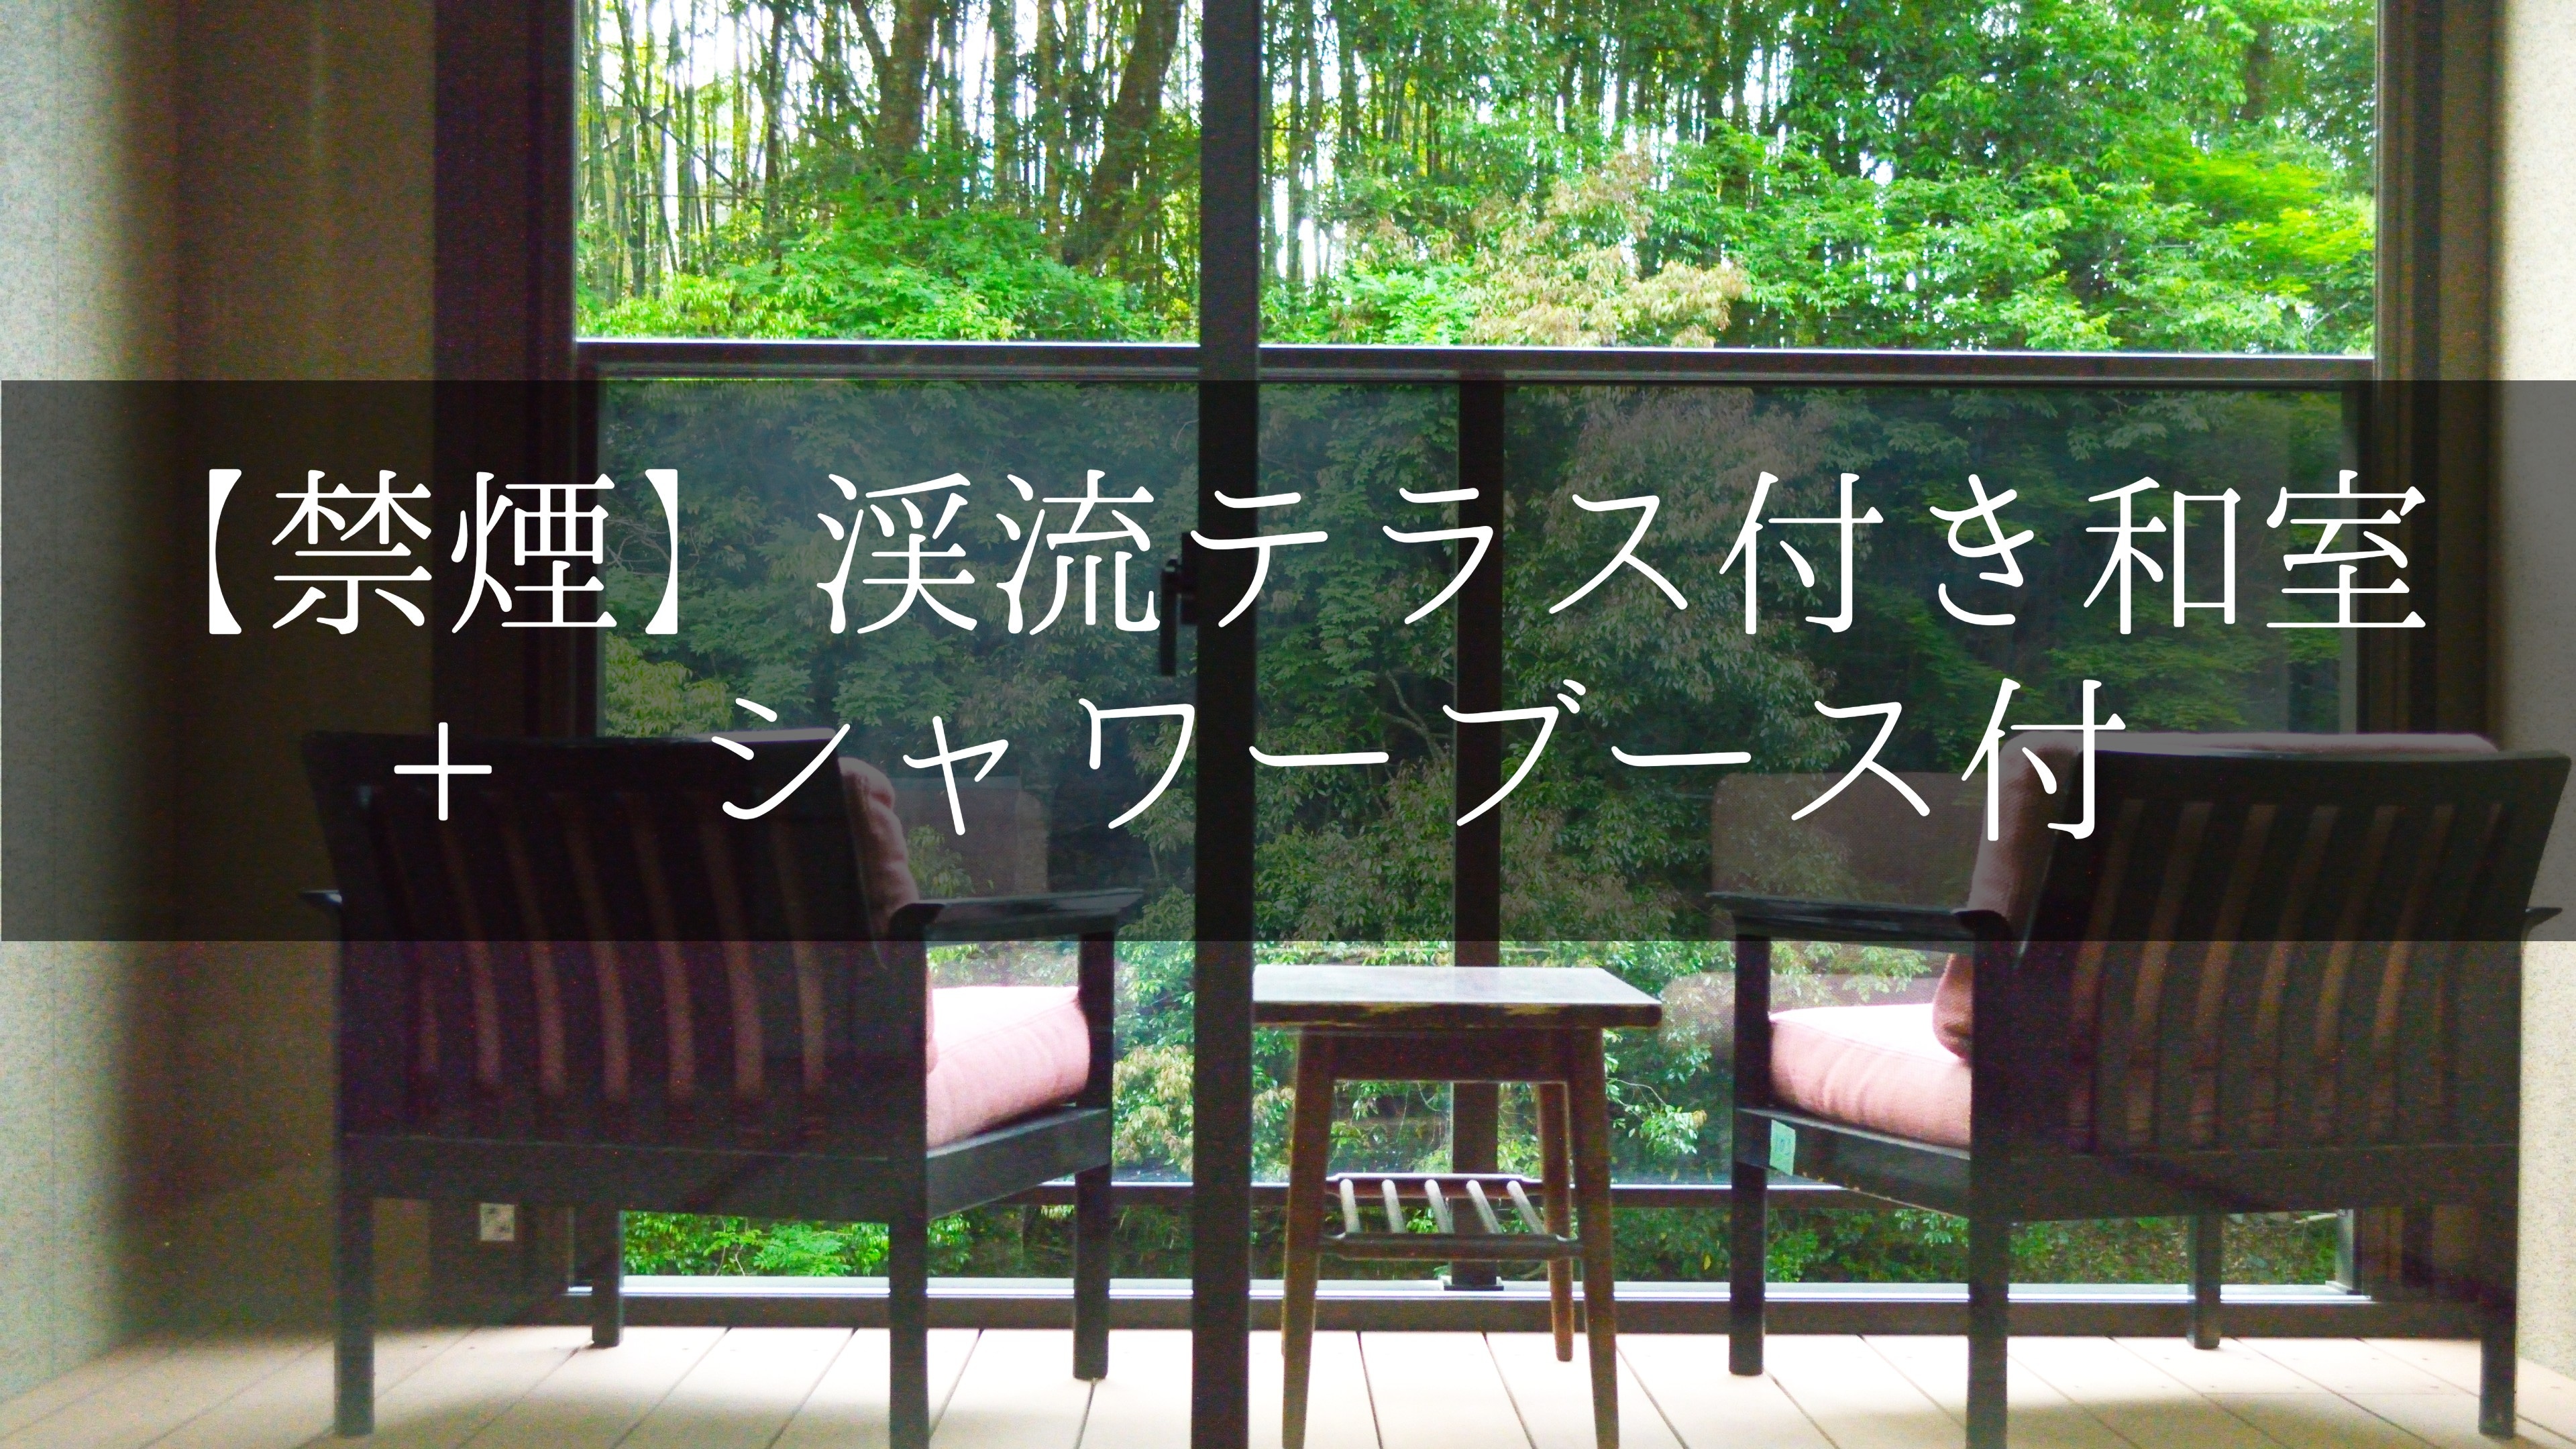 [Non-smoking] Japanese-style room with mountain stream terrace + shower booth. Introduction